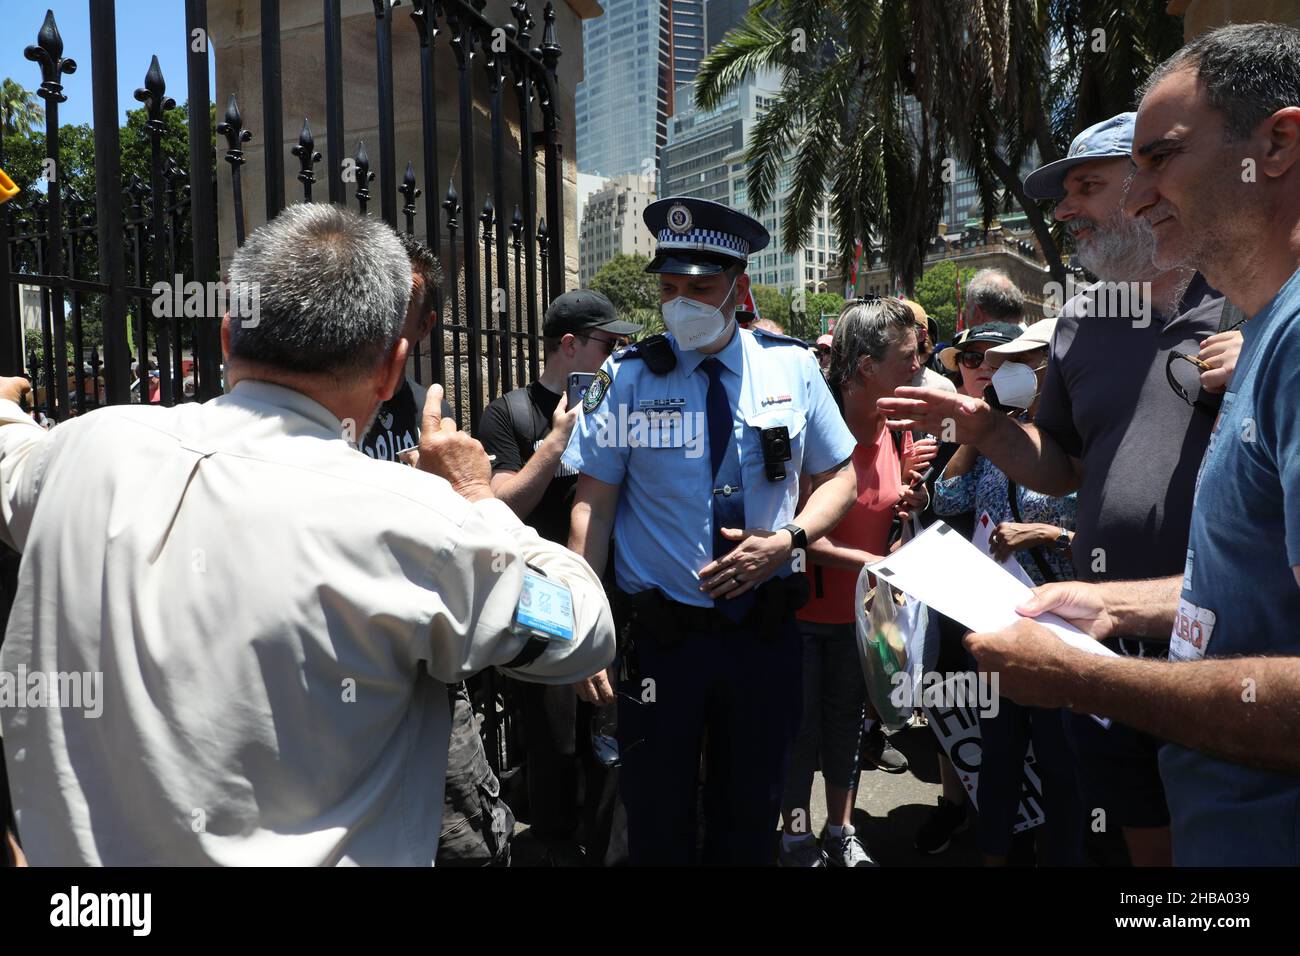 Sydney, Australia. 18th December 2021. ‘Stand to lawfully remove all parliament ministers & issue trespass notices to Sydney New South Wales Parliament House, High Court & Governors House.’ Protest to stand against tyranny, fraud, treason & political corruption. Credit: Richard Milnes/Alamy Live News Stock Photo